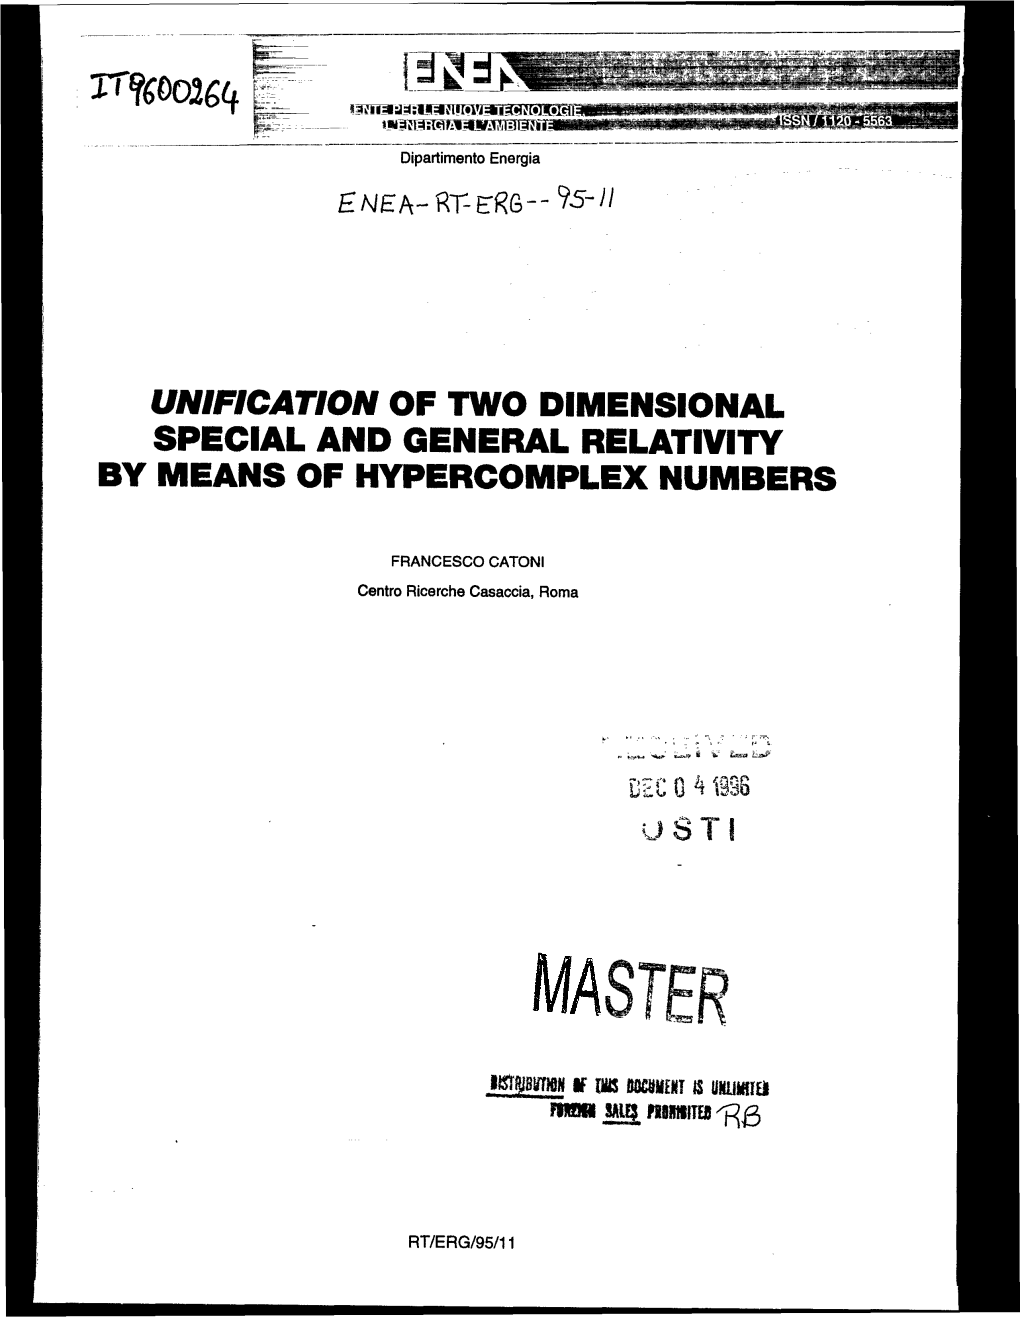 Unification of Two Dimensional Special and General Relativity by Means of Hypercomplex Numbers